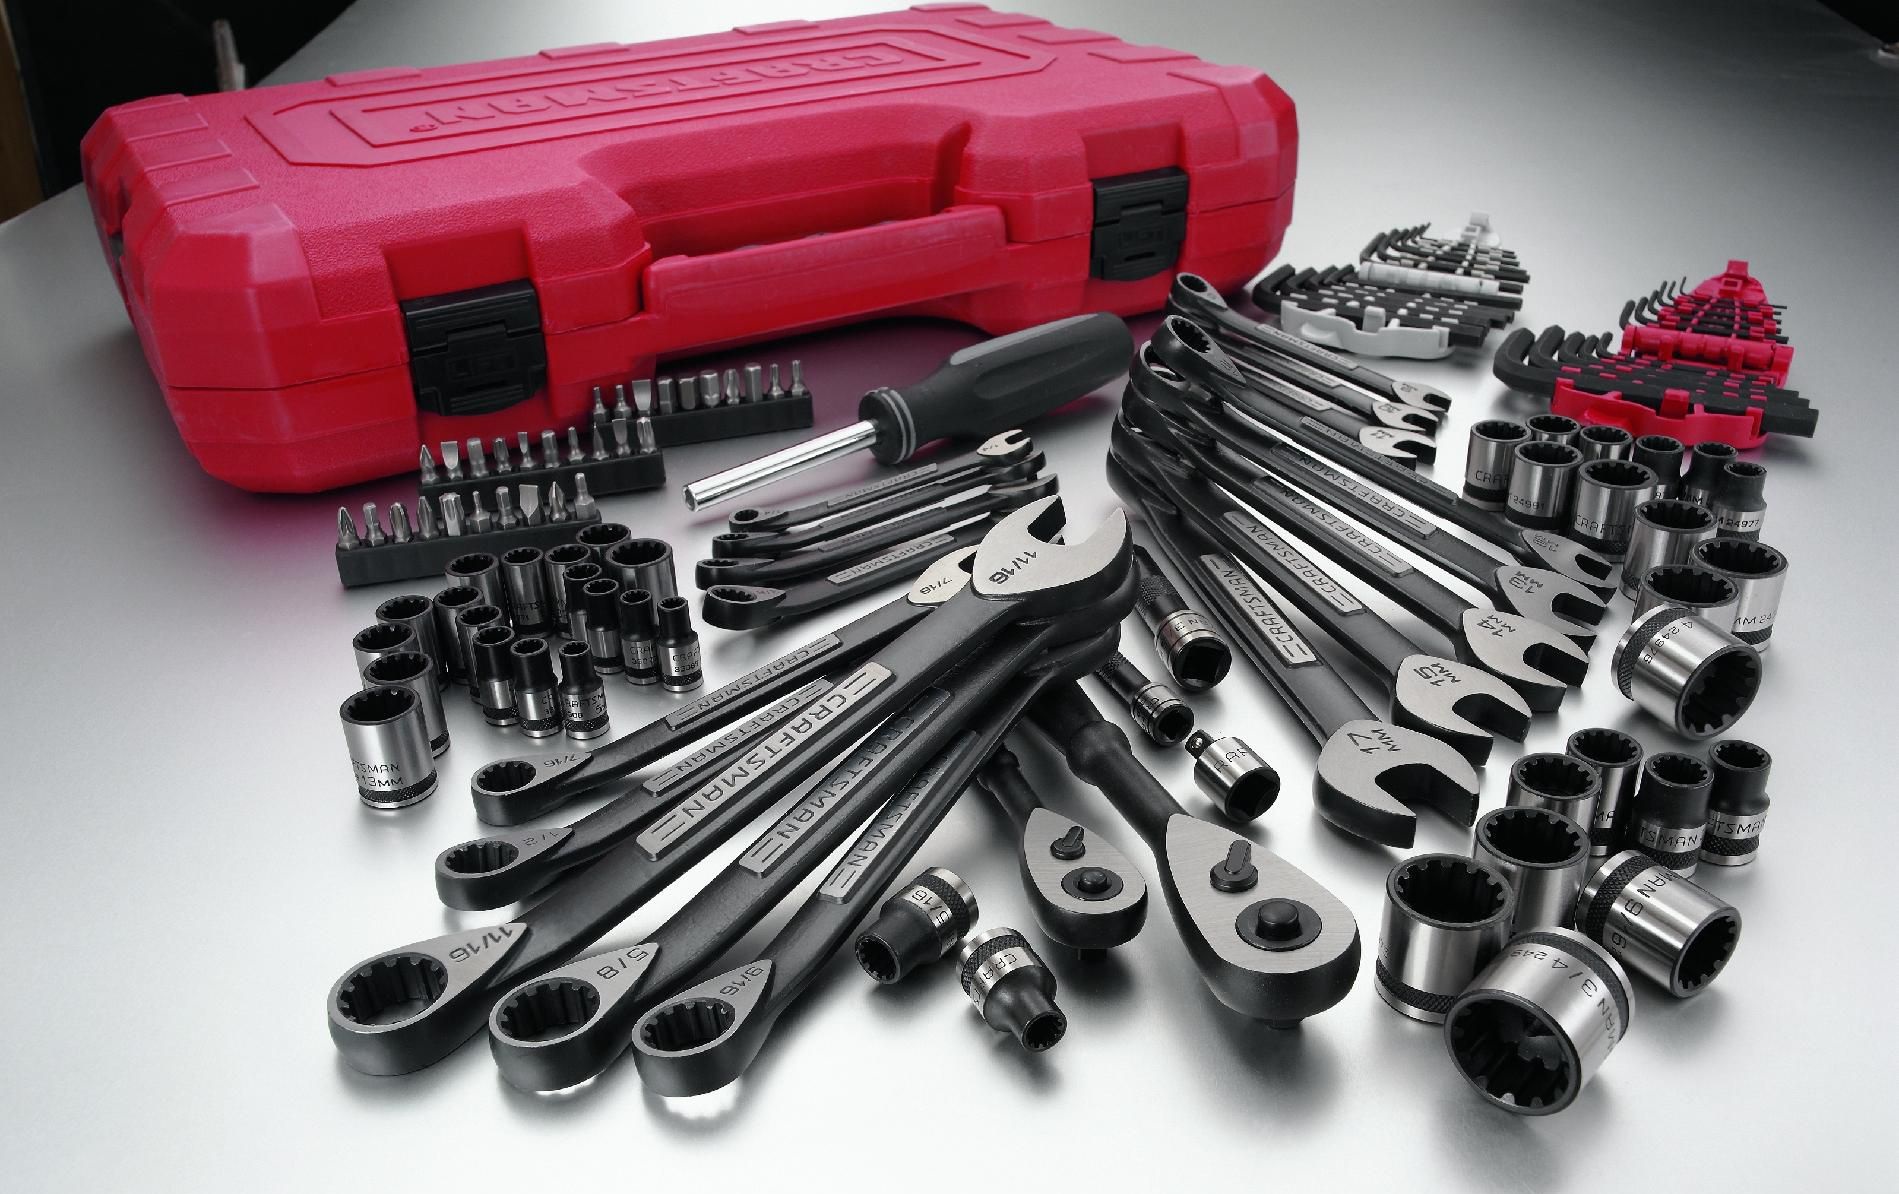 Stanley Black & Decker Completes Purchase Of Craftsman Brand From Sears  Holdings